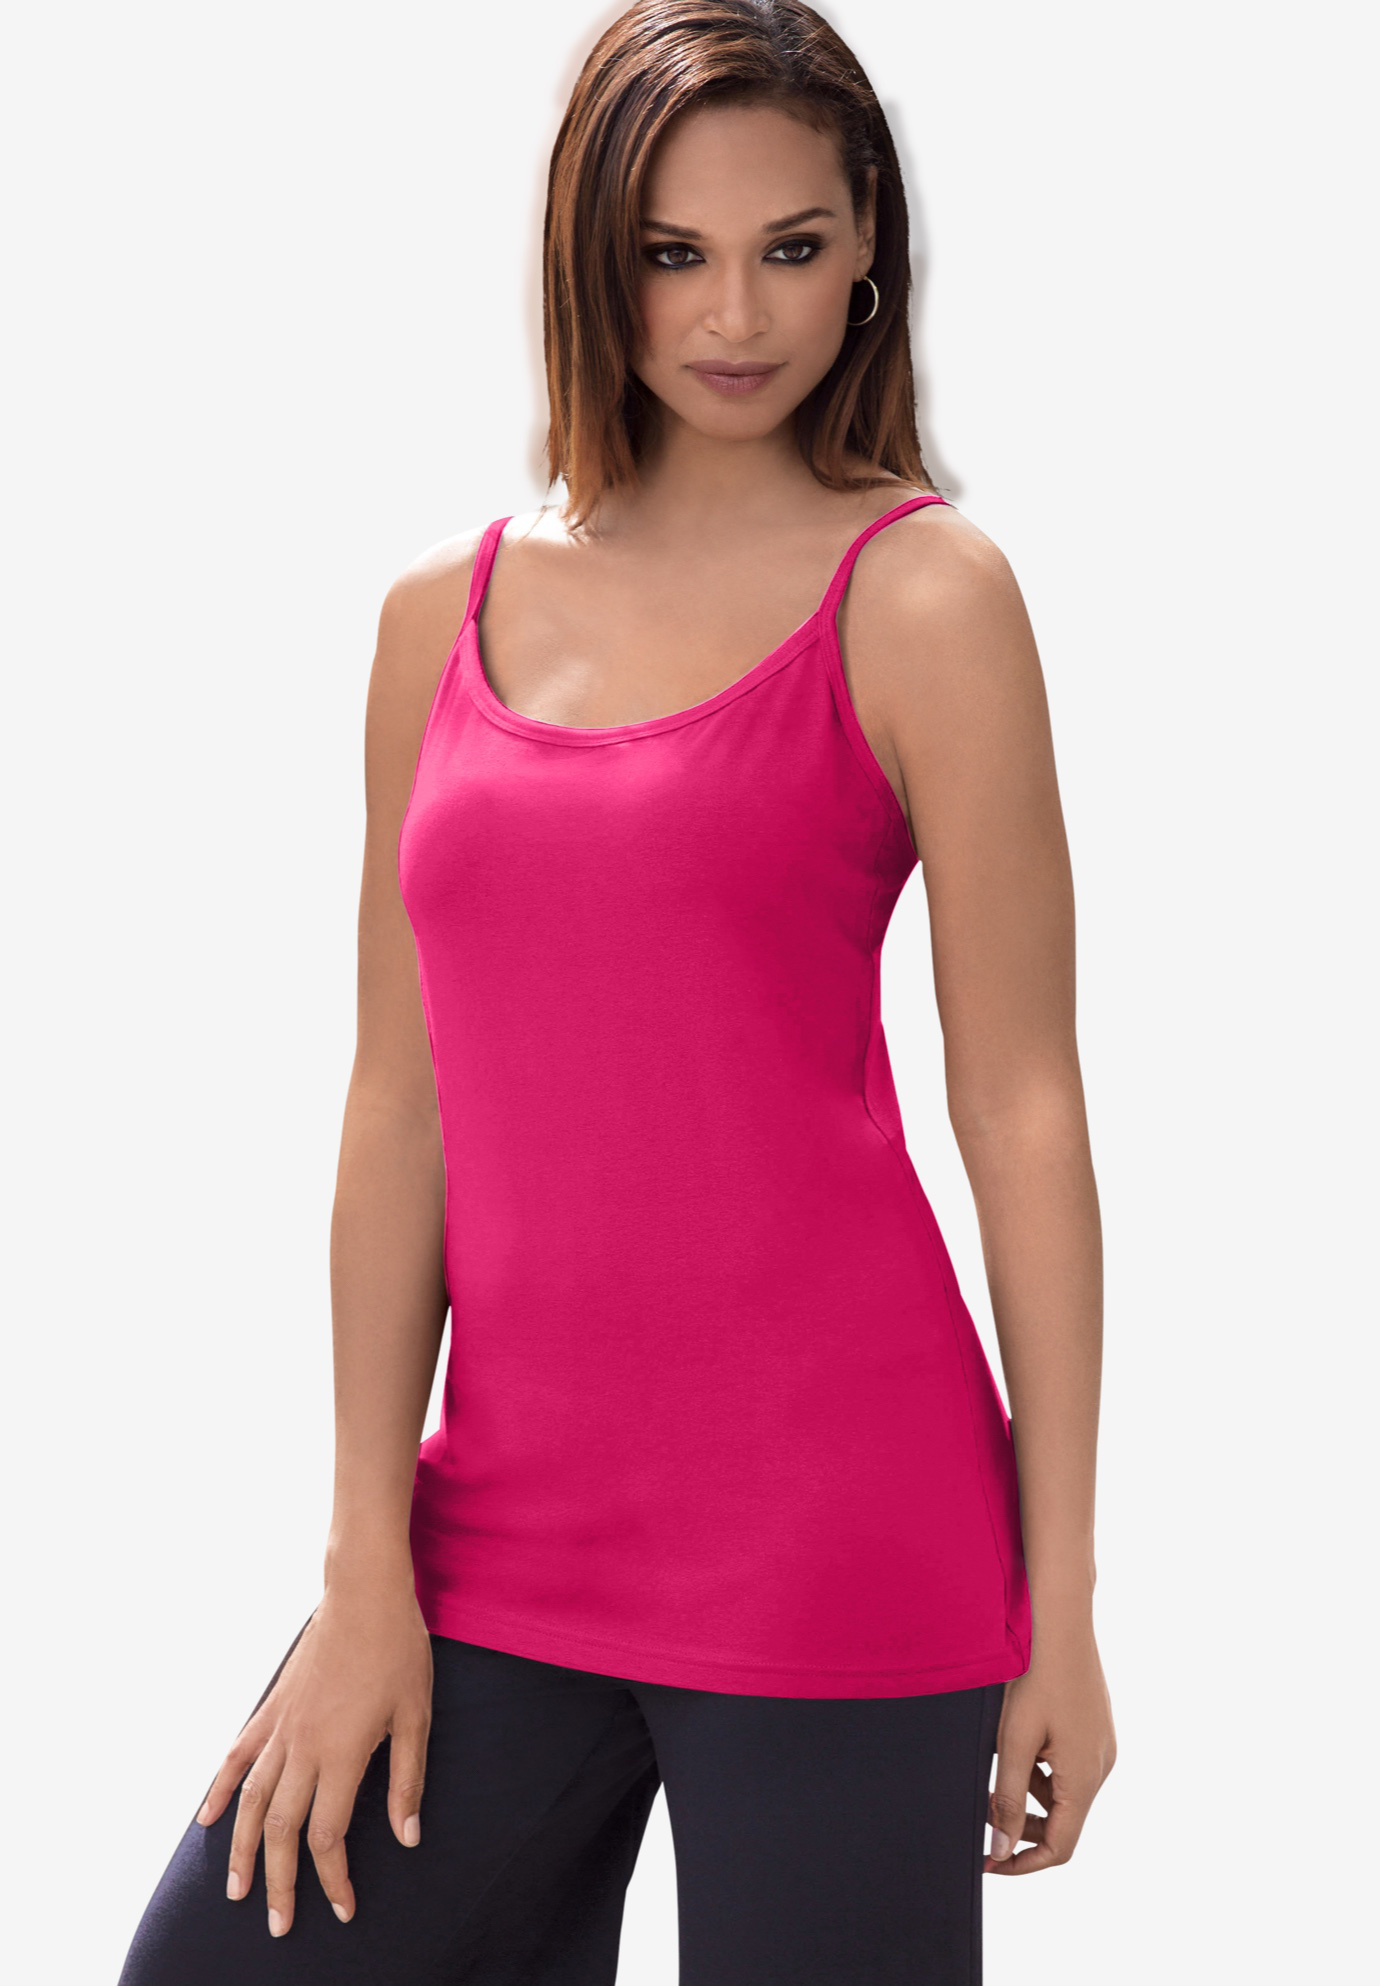 Cami Top with Adjustable Straps, 